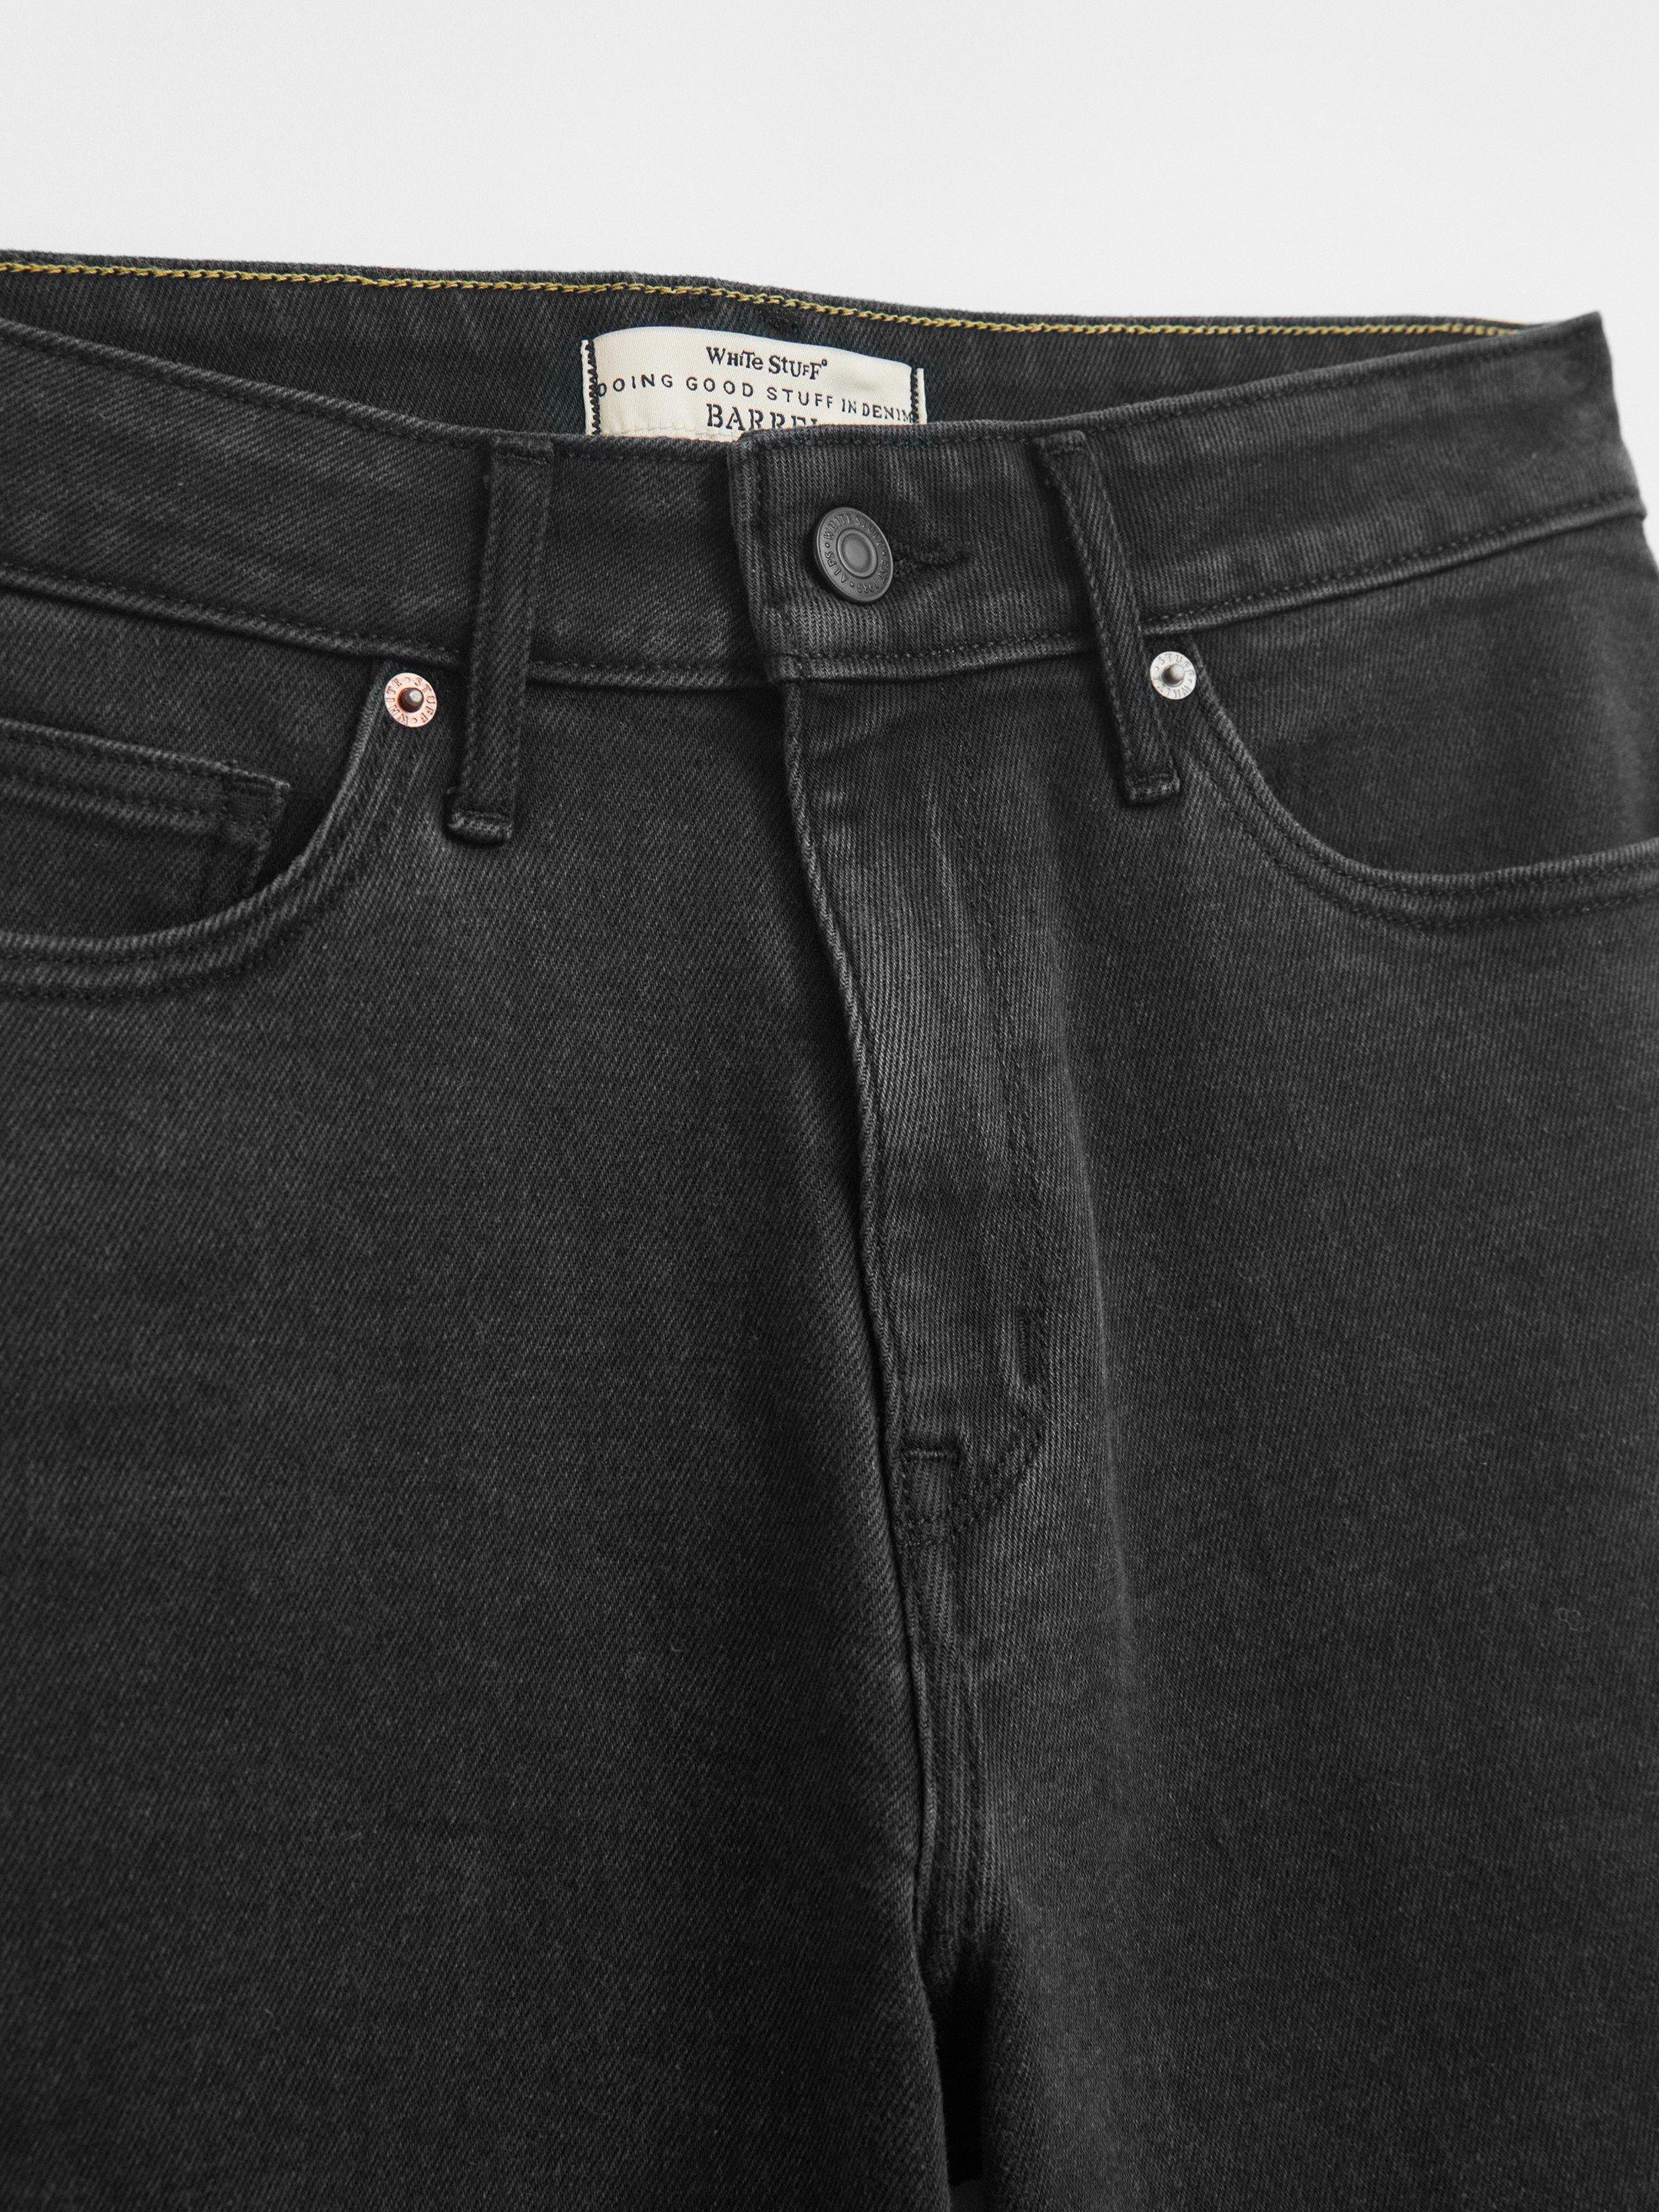 Robyn Barrel Mid Rise Jean in WASHED BLK - FLAT DETAIL